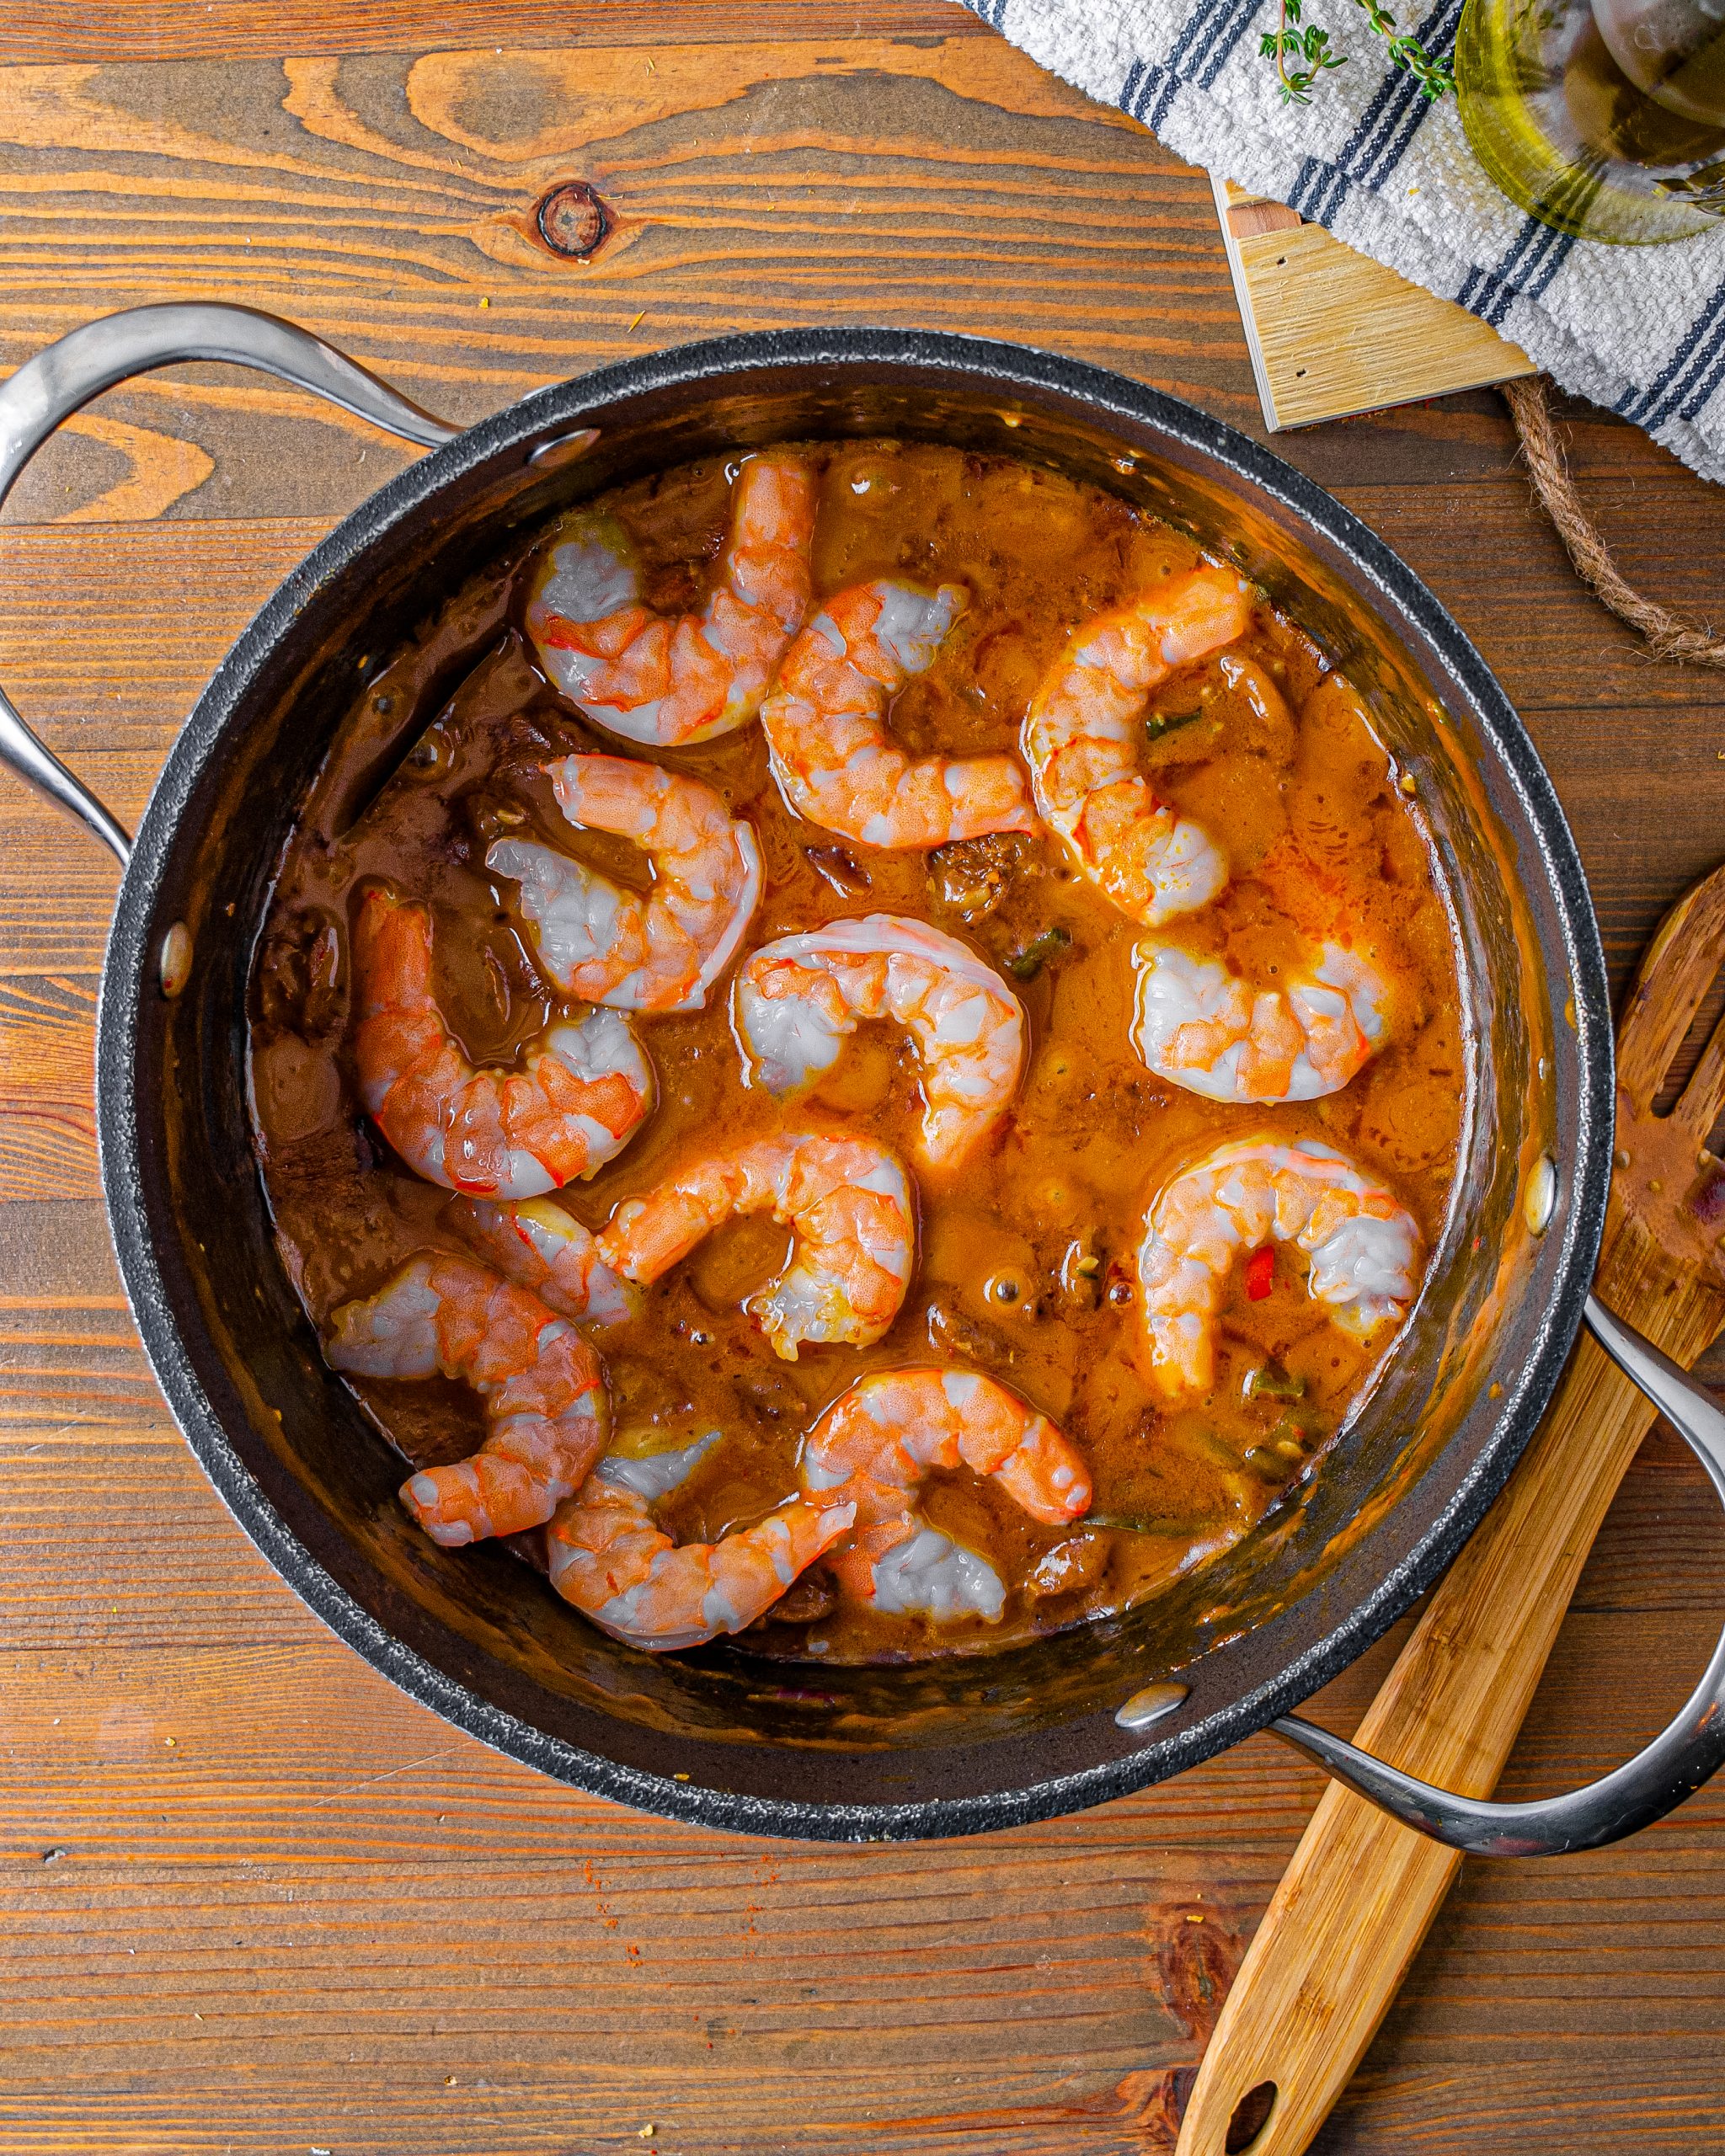 Stir the shrimp into the pot, and simmer for 5-10 minutes until they are cooked well. 